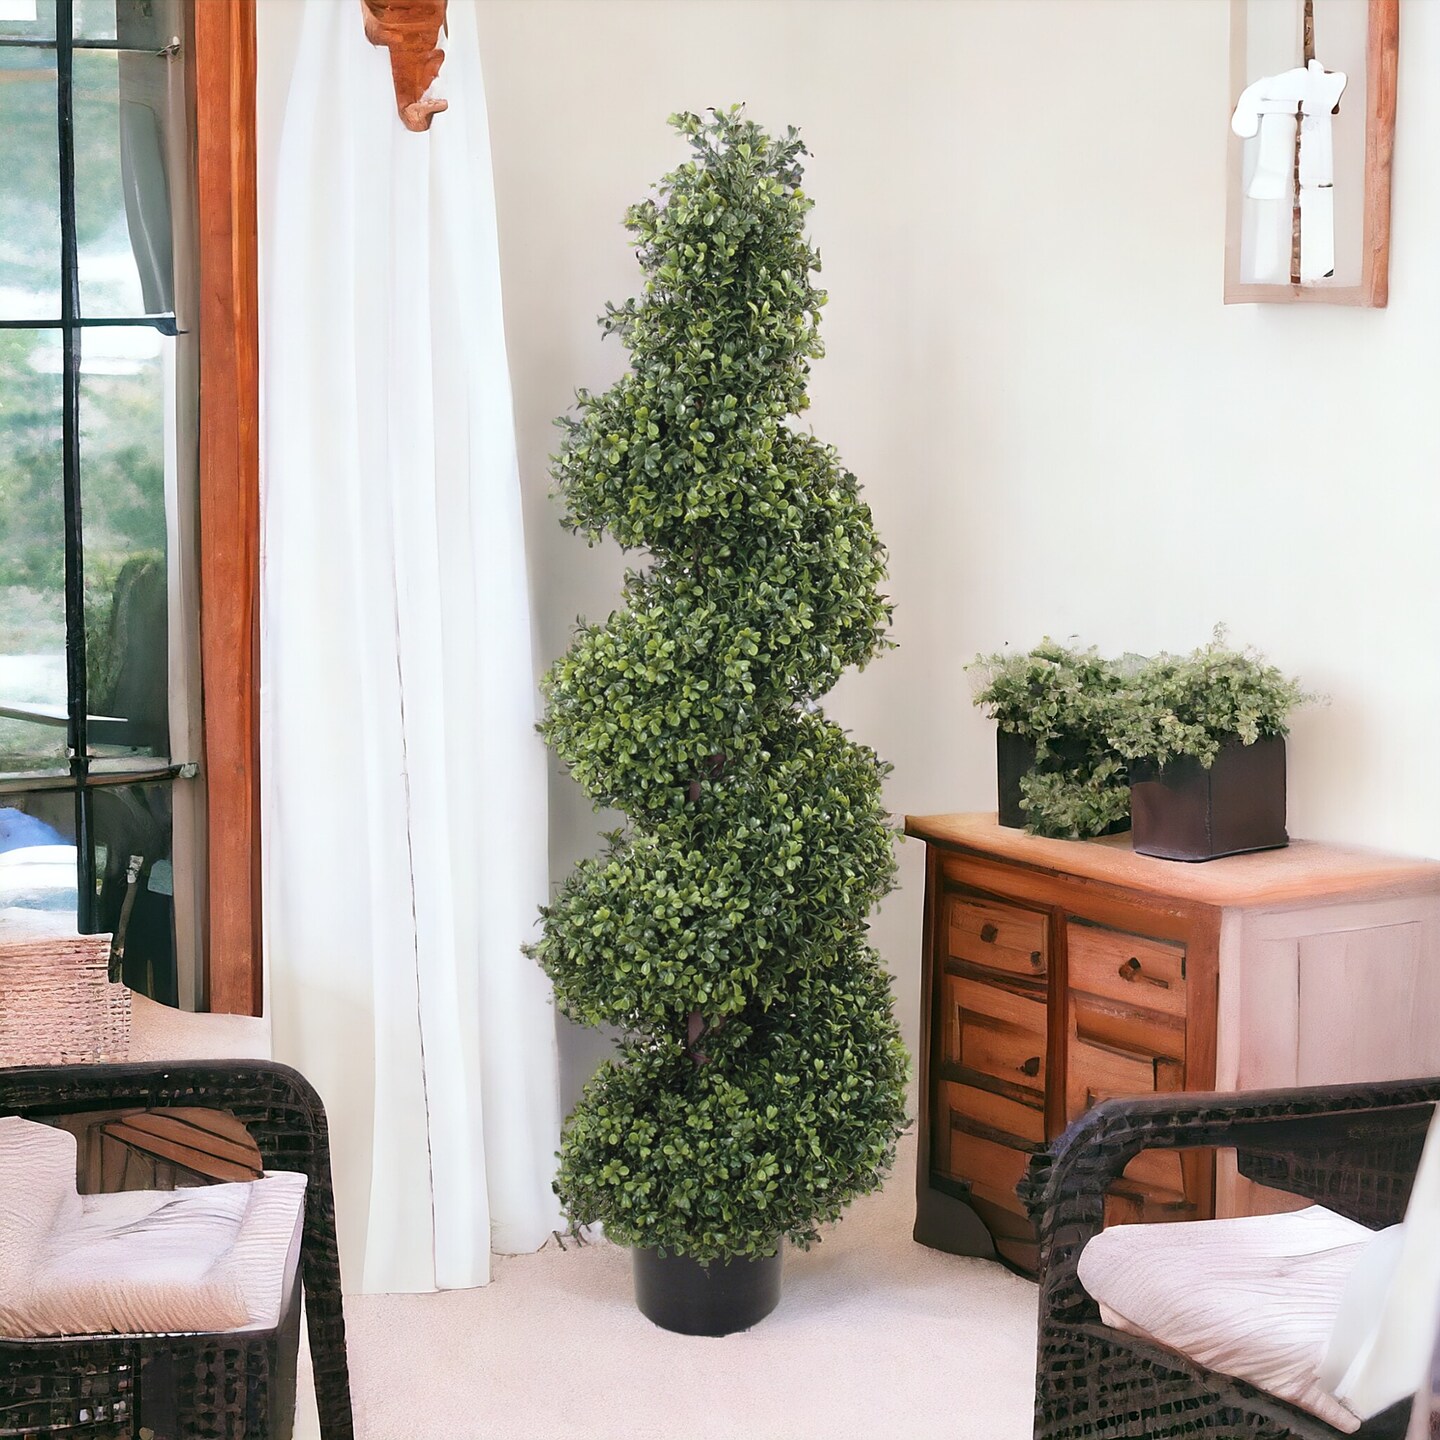 4ft Spiral Boxwood Topiary Tree in Black Pot by Floral Home&#xAE;